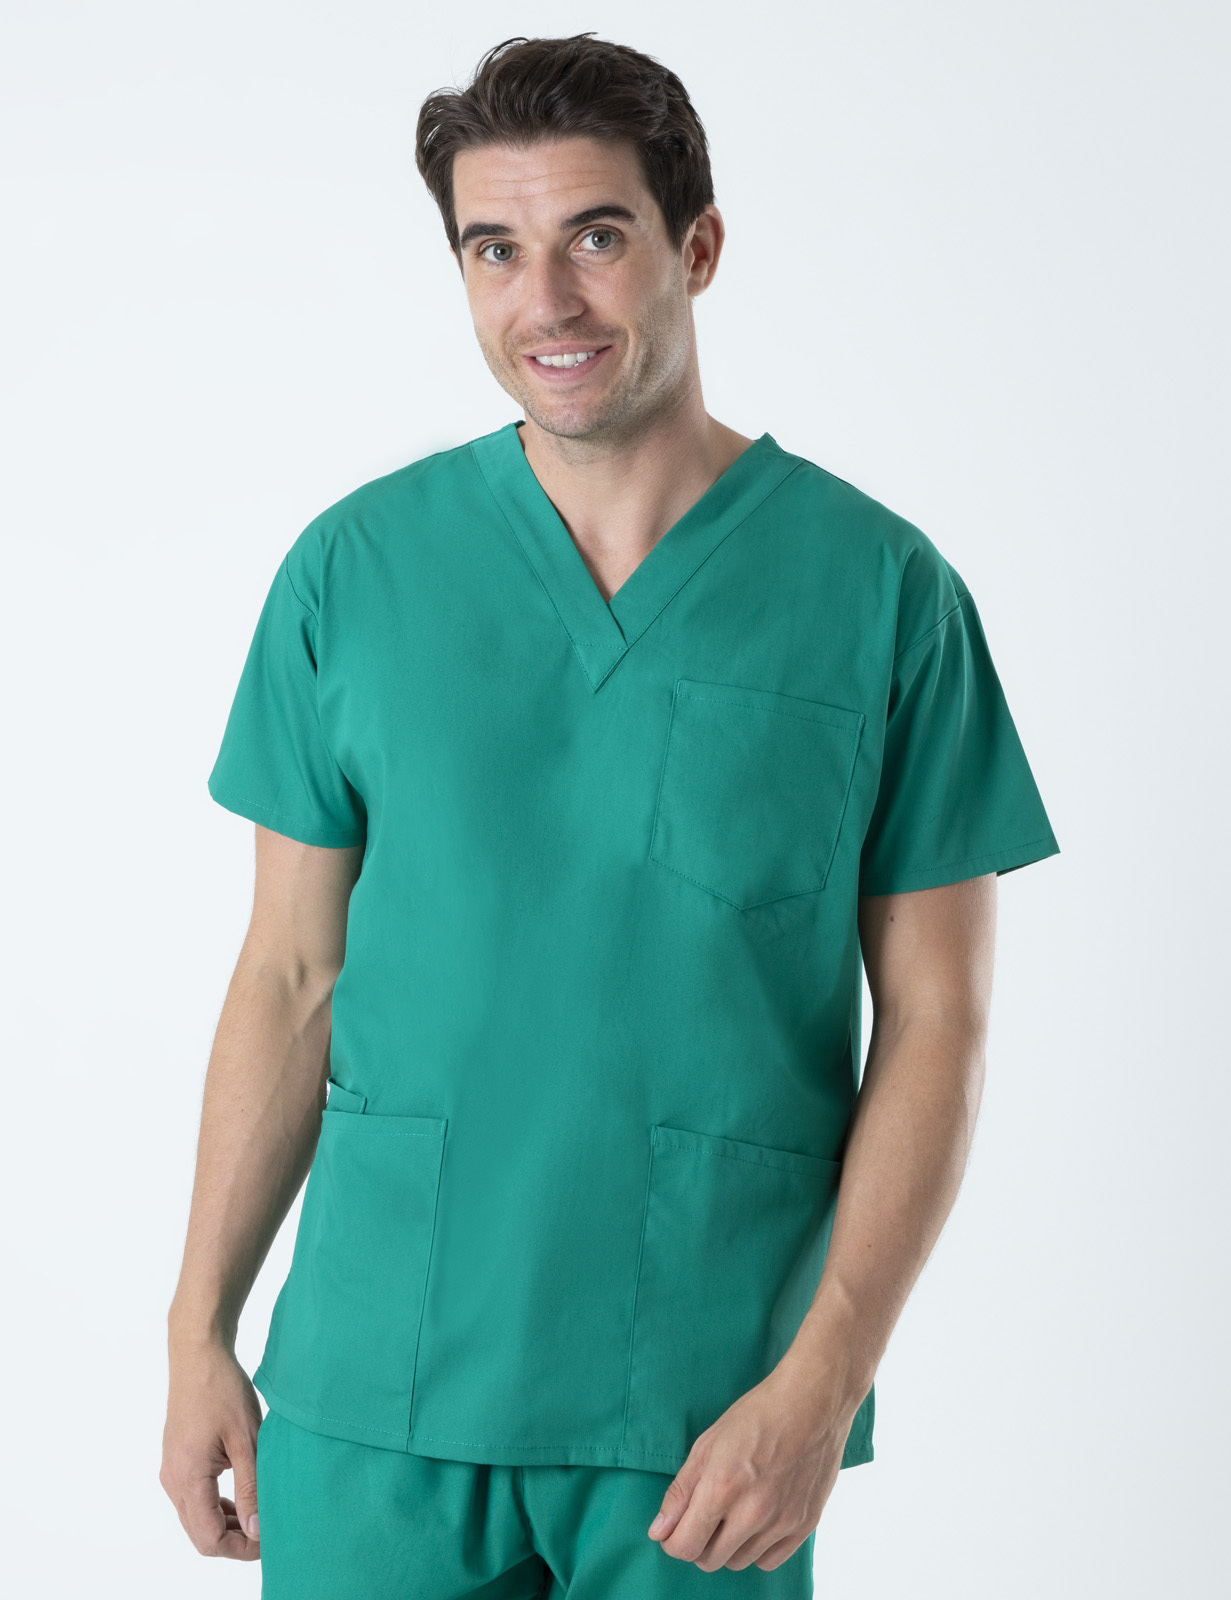 Canberra Hospital - Justice Health Department (4 Pocket Scrub Top and Cargo Pants in Hunter incl Logo)